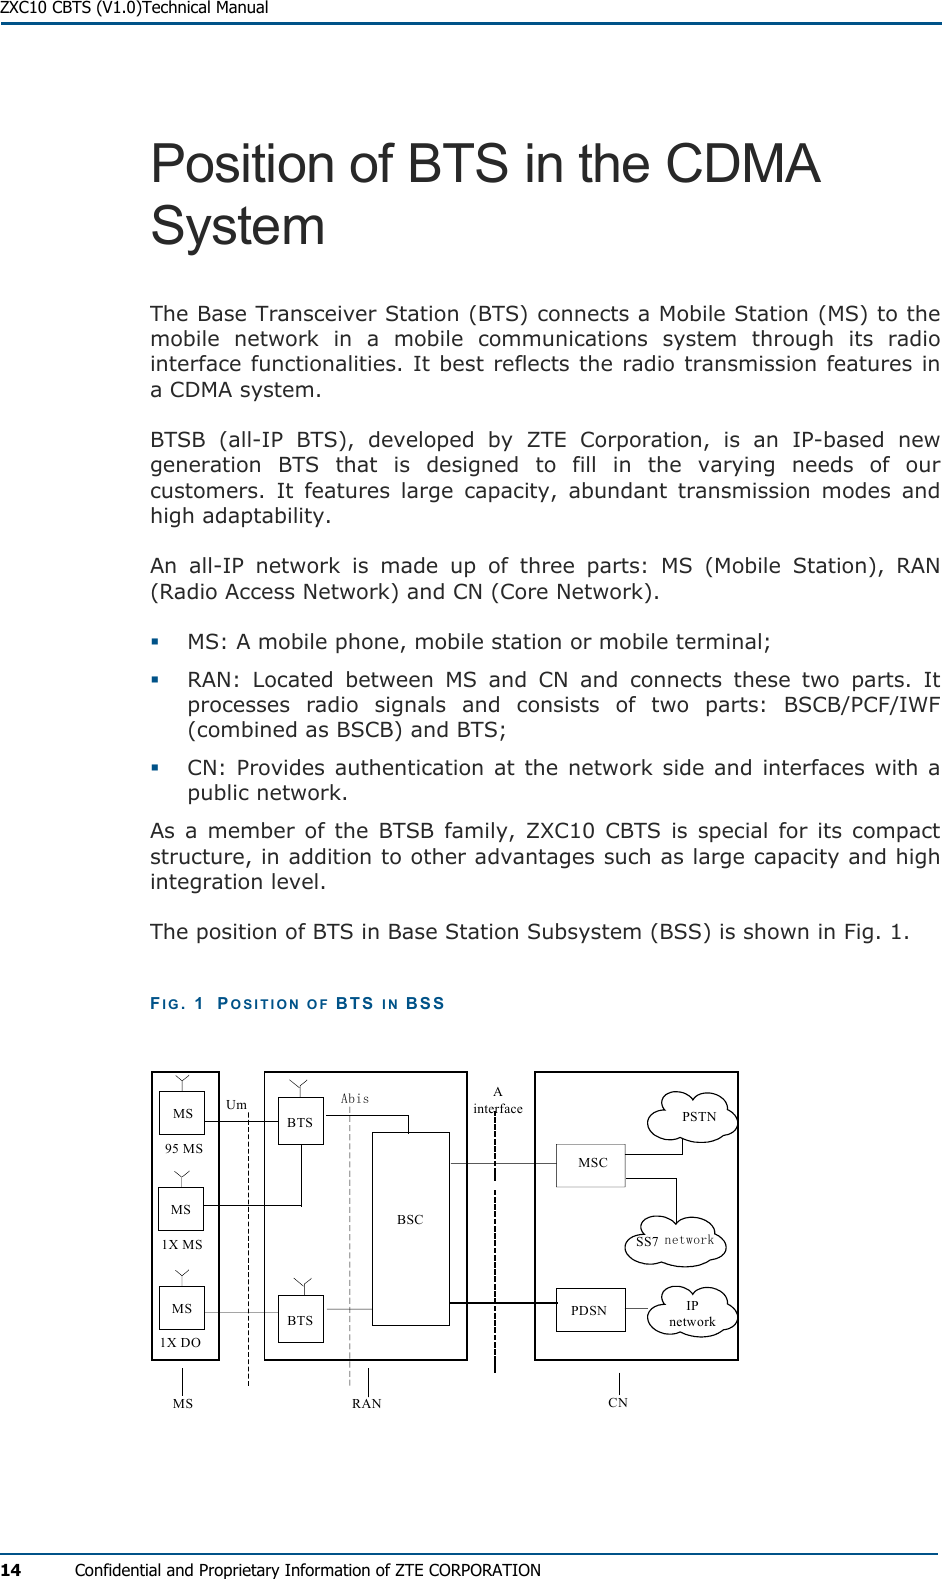  ZXC10 CBTS (V1.0)Technical Manual 14  Confidential and Proprietary Information of ZTE CORPORATION Position of BTS in the CDMA System  The Base Transceiver Station (BTS) connects a Mobile Station (MS) to the mobile network in a mobile communications system through its radio interface functionalities. It best reflects the radio transmission features in a CDMA system. BTSB (all-IP BTS), developed by ZTE Corporation, is an IP-based new generation BTS that is designed to fill in the varying needs of our customers. It features large capacity, abundant transmission modes and high adaptability.  An all-IP network is made up of three parts: MS (Mobile Station), RAN (Radio Access Network) and CN (Core Network).   MS: A mobile phone, mobile station or mobile terminal;   RAN: Located between MS and CN and connects these two parts. It processes radio signals and consists of two parts: BSCB/PCF/IWF (combined as BSCB) and BTS;   CN: Provides authentication at the network side and interfaces with a public network. As a member of the BTSB family, ZXC10 CBTS is special for its compact structure, in addition to other advantages such as large capacity and high integration level. The position of BTS in Base Station Subsystem (BSS) is shown in Fig. 1. FIG. 1  POSITION OF BTS IN BSS PSTNUm AbisBSCMSCPDSNSS7 networkBTSMS95 MS1X MS1X DOMS RAN CNIP networkMSMSBTSAinterface  